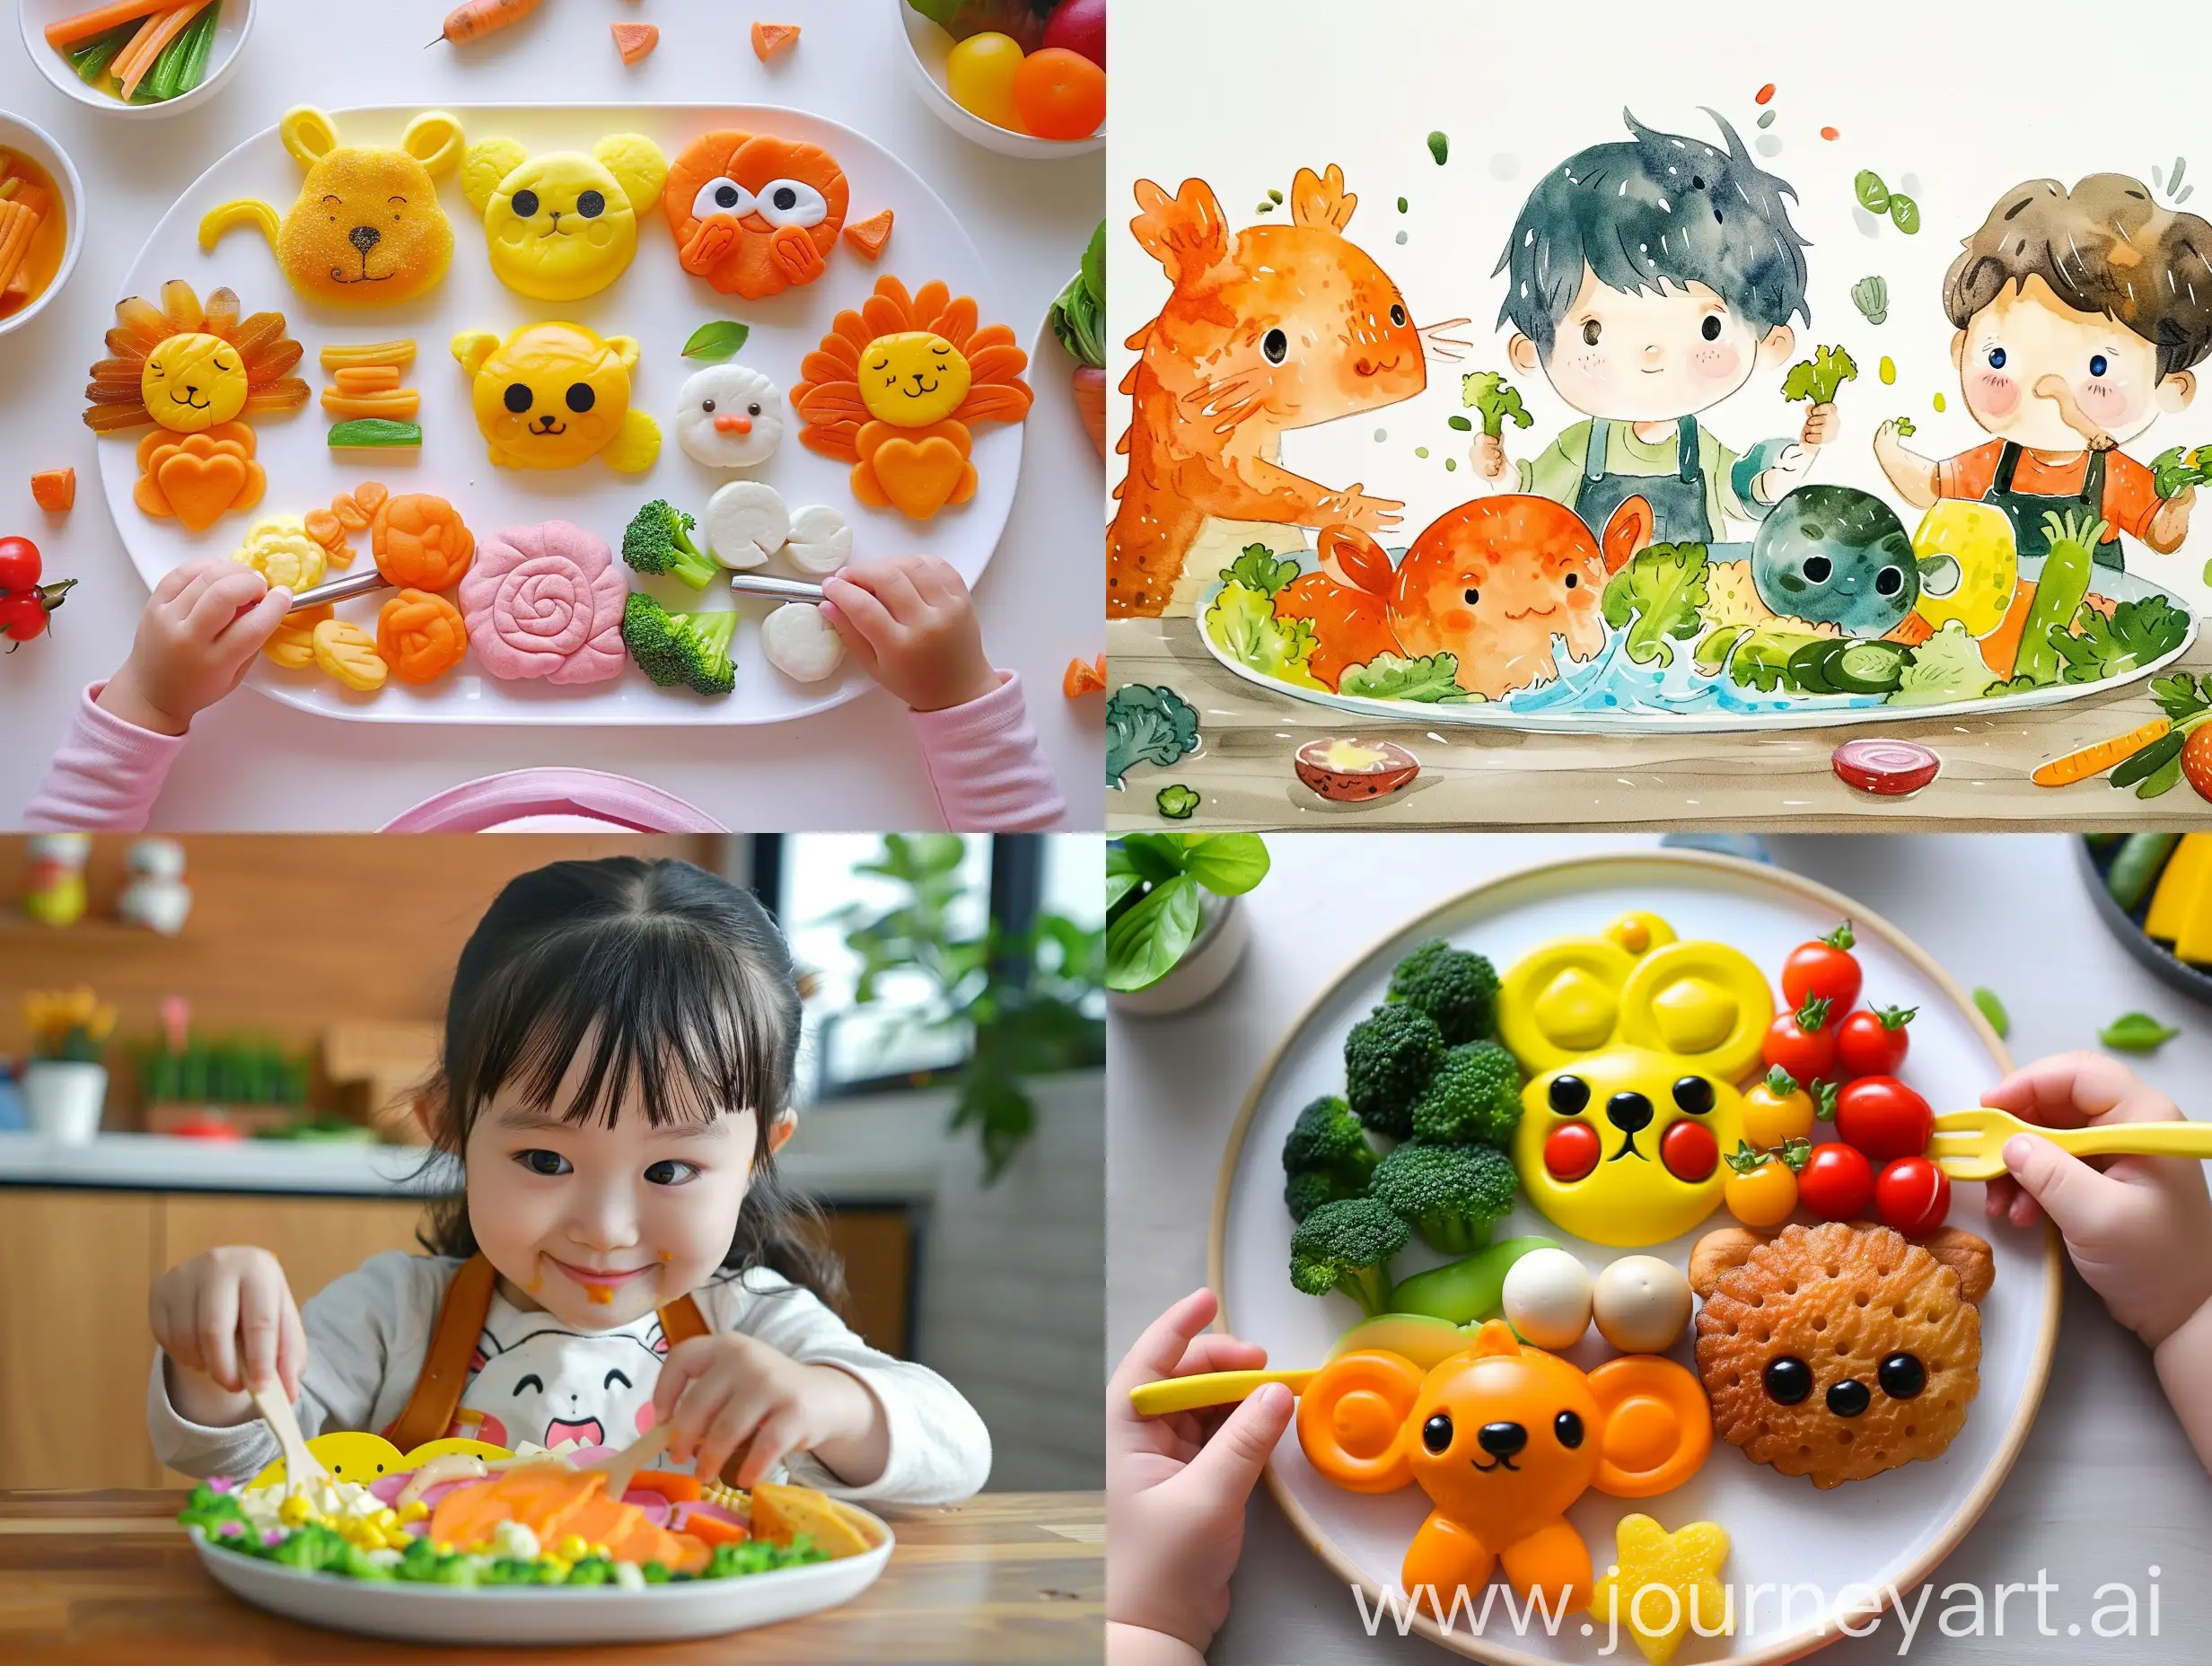 Creative-Tips-for-Encouraging-Children-to-Eat-Fun-Food-Ideas-and-Cooking-Participation